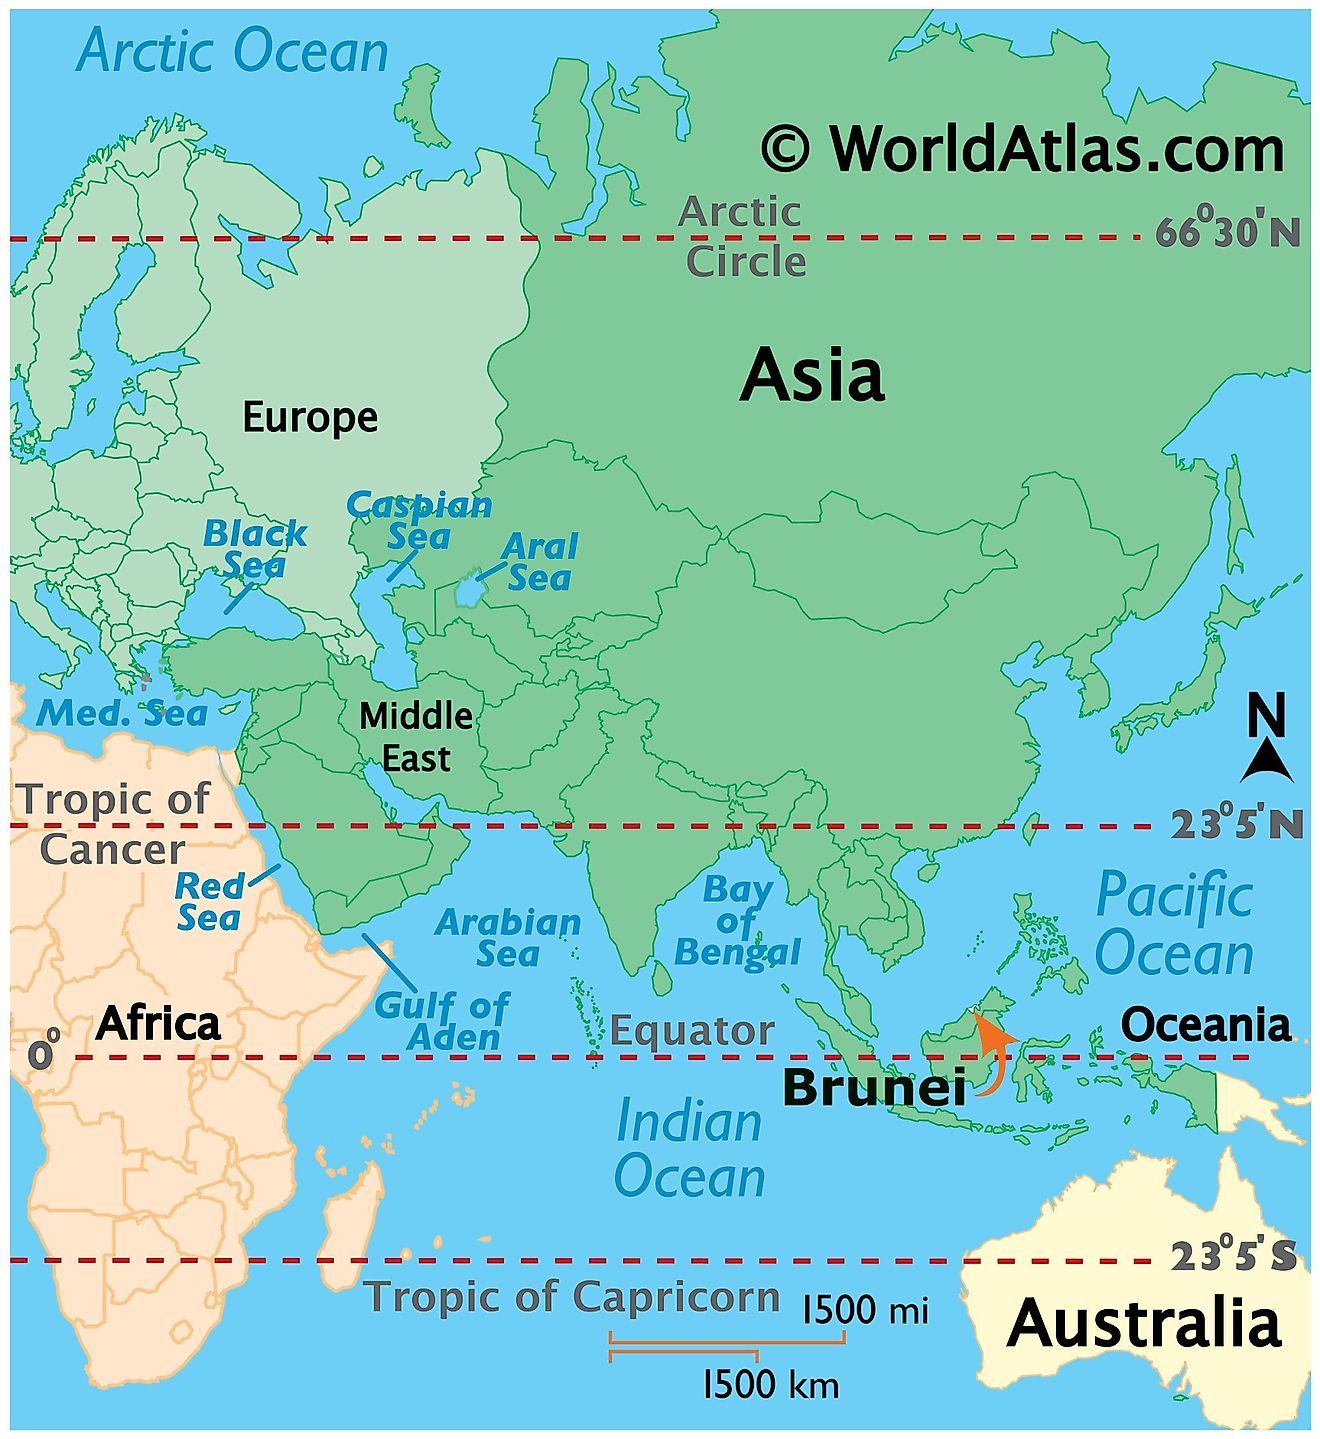 Map showing location of Brunei Darussalam in the world.